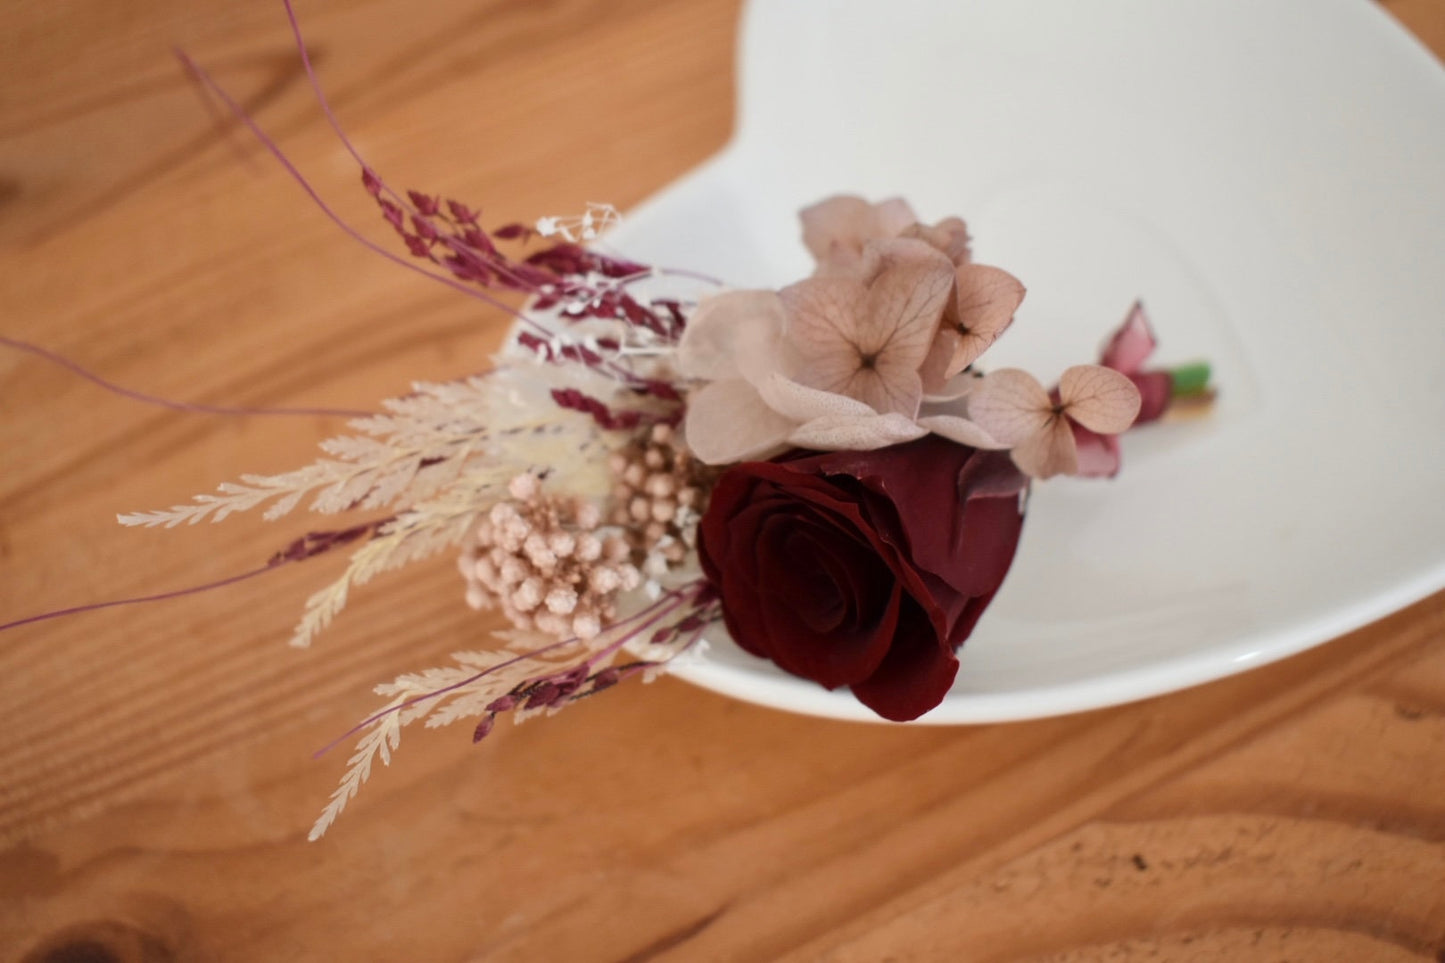 Nude, blush and red boutonniere